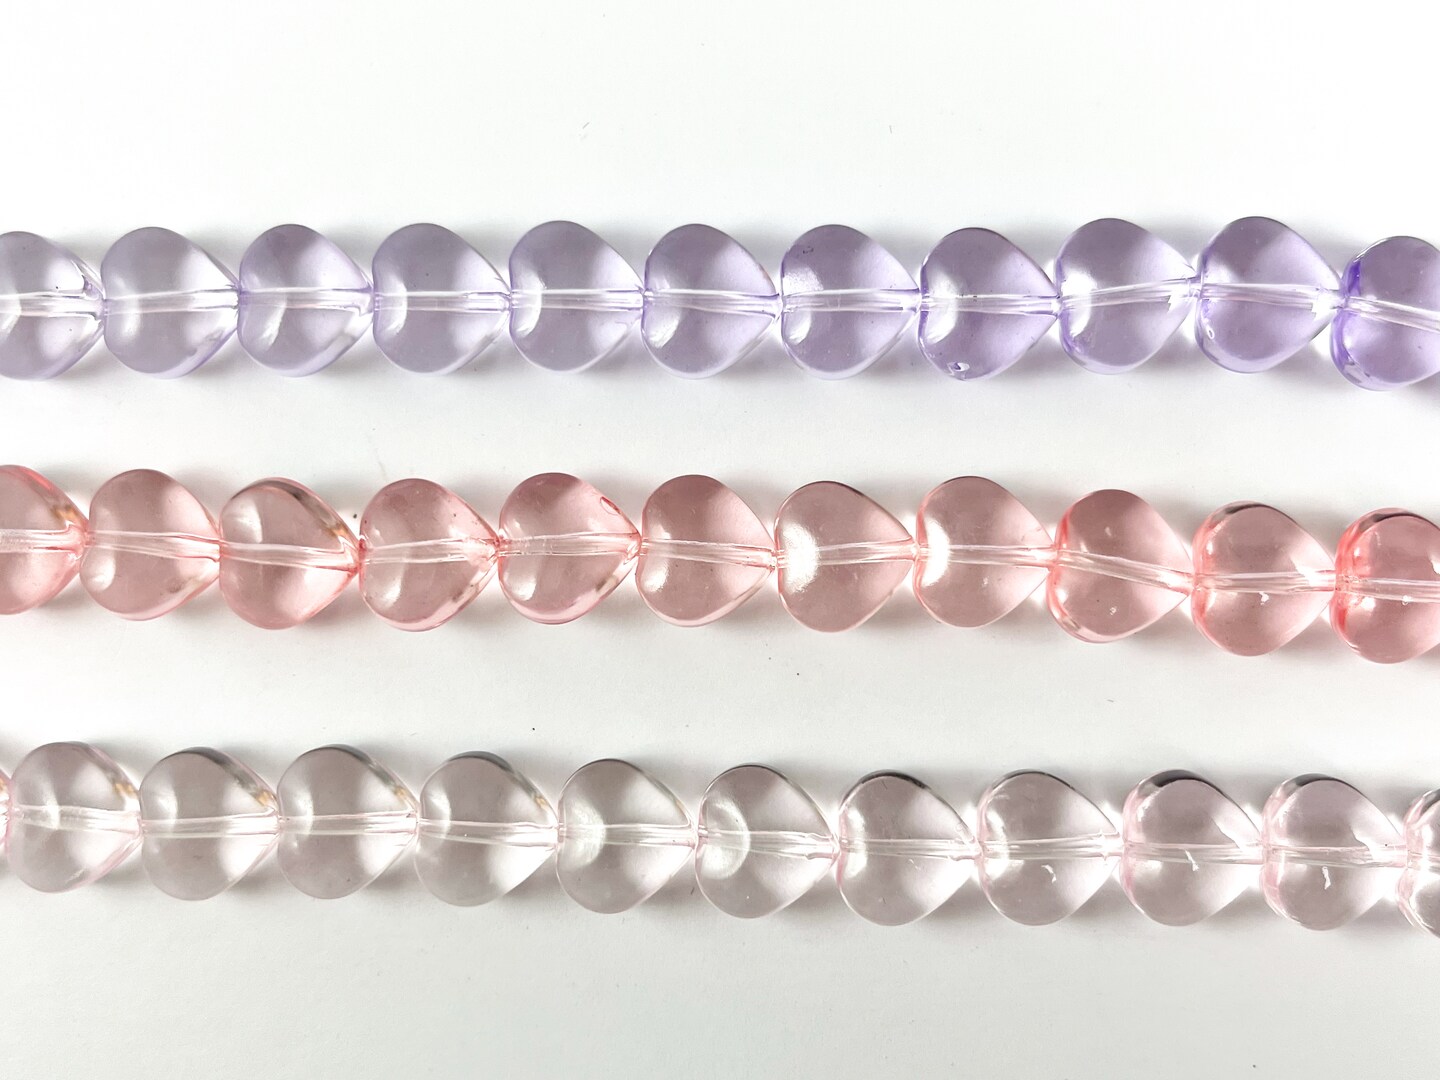 10mm Heart Shape Colorful Dyed Glass Beads Cute Transparent Glass Beads | 7 Colors Available Heart Beads for Valentine&#x27;s Day Jewelry Making. 1 Strand